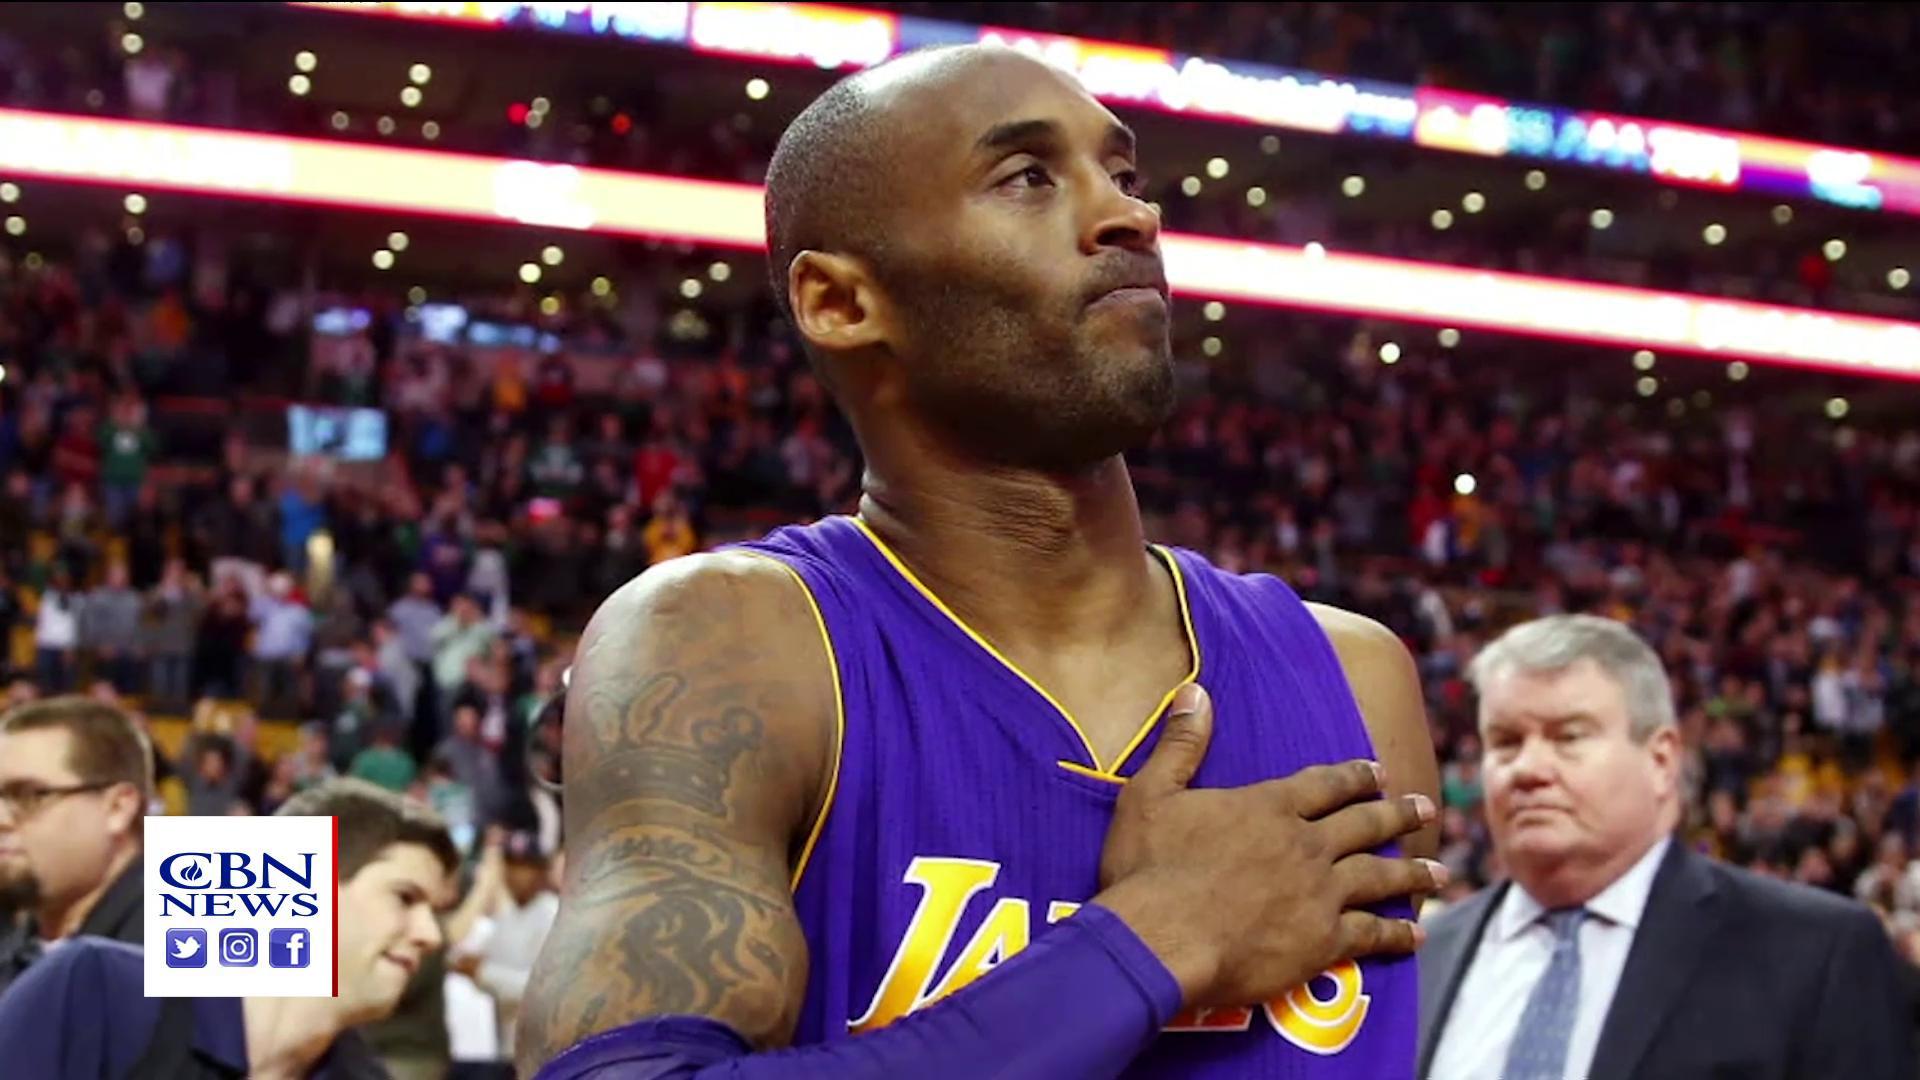 The Life and Legacy of NBA Superstar Kobe Bryant